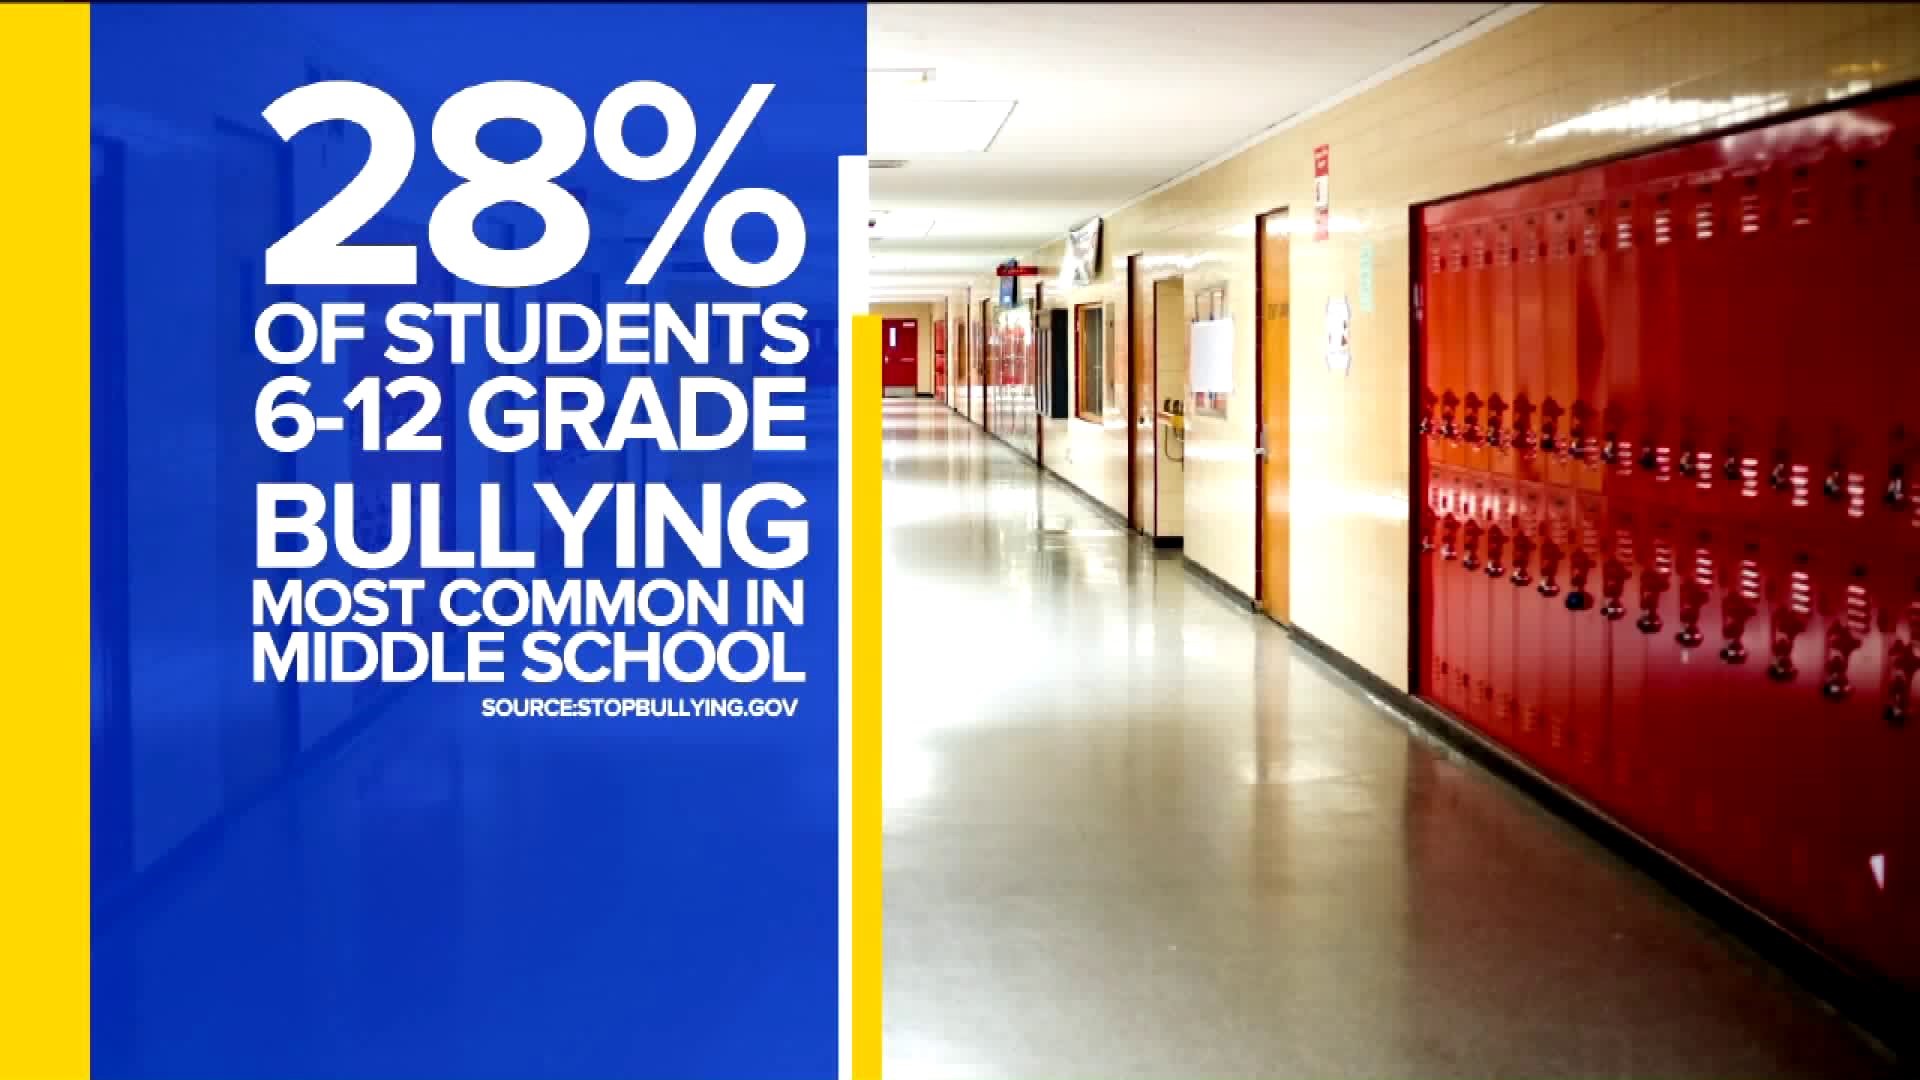 NY Community Cracks Down on Bullying - Parents Face Fines, Jail Time